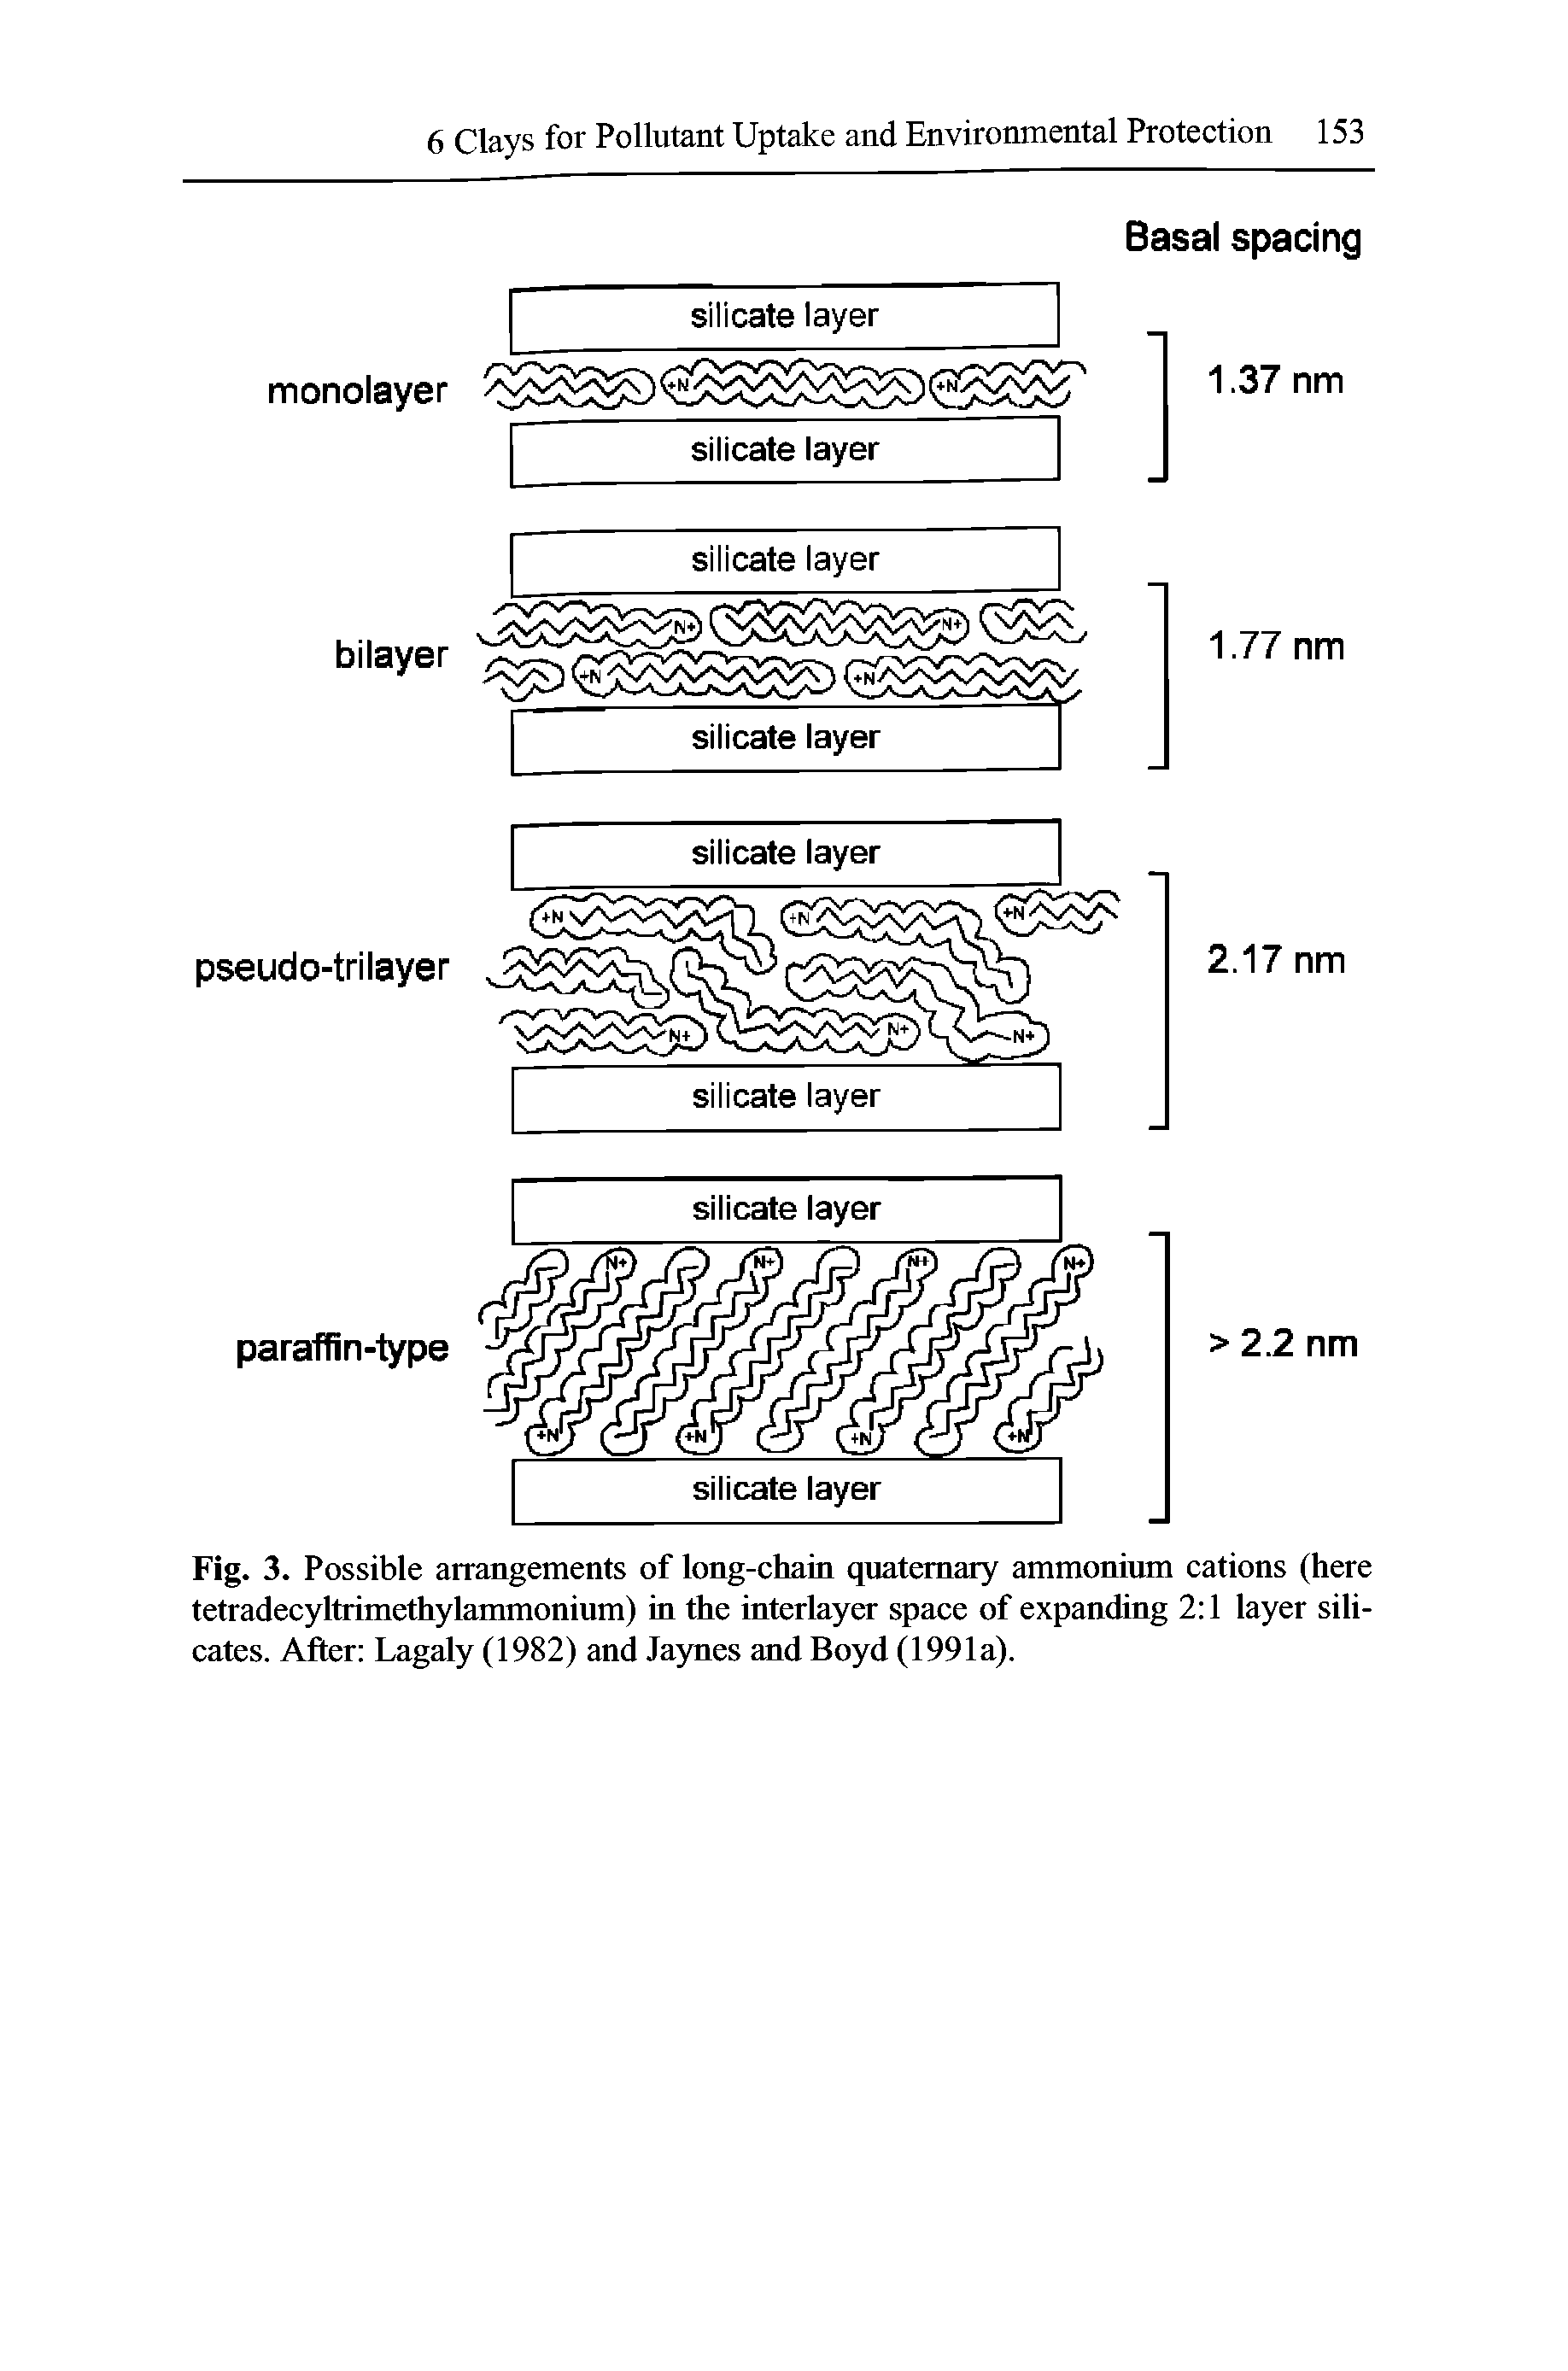 Fig. 3. Possible arrangements of long-chain quaternary ammonium cations (here tetradecyltrimethylammonium) in the interlayer space of expanding 2 1 layer silicates. After Lagaly (1982) and Jaynes and Boyd (1991a).